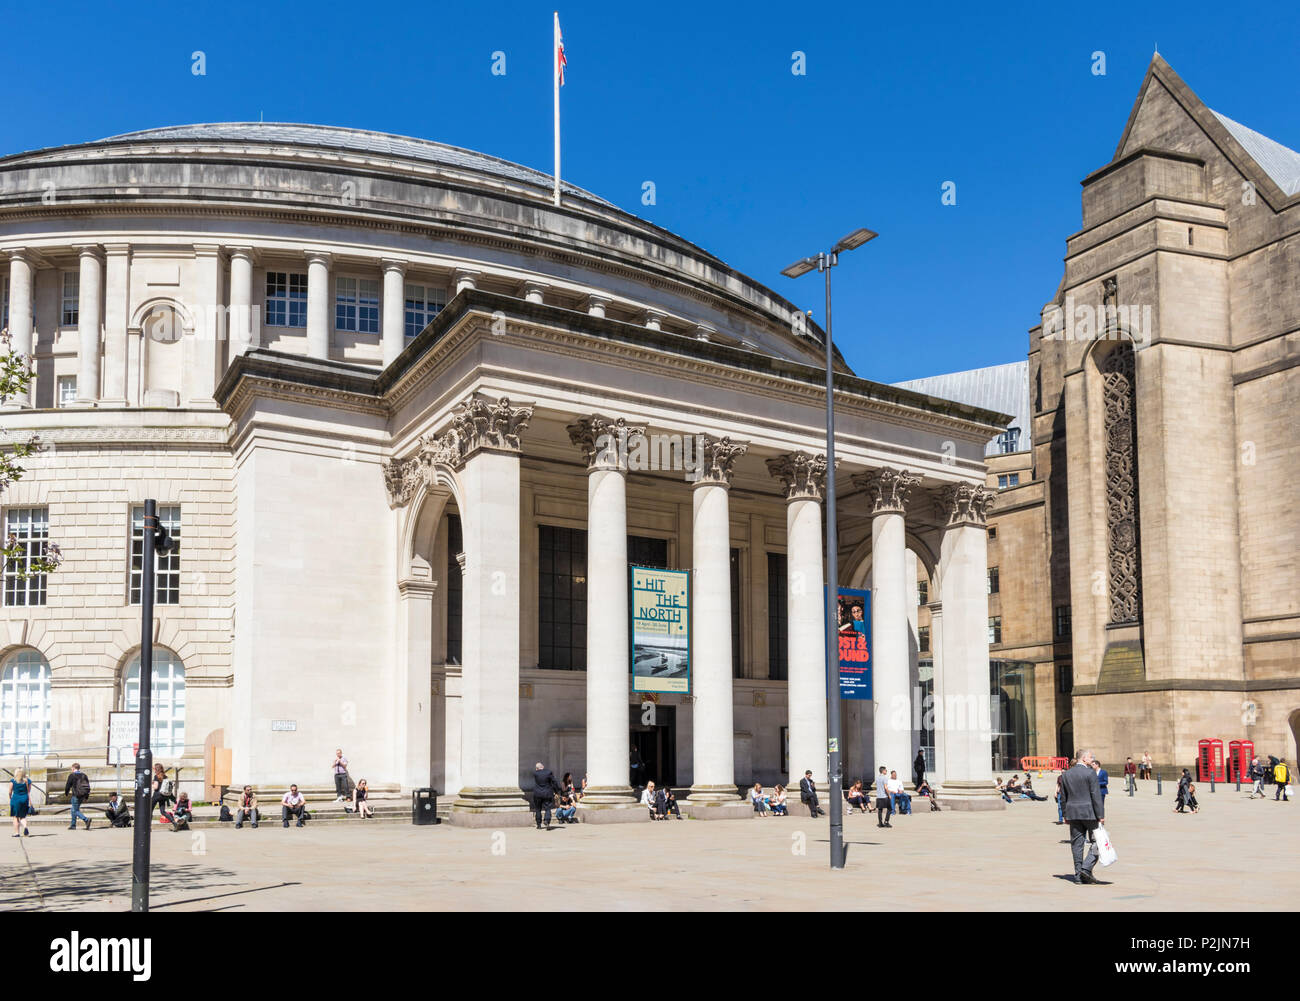 England Manchester England greater Manchester City centre city center manchester central library st peters square manchester city centre manchester uk Stock Photo